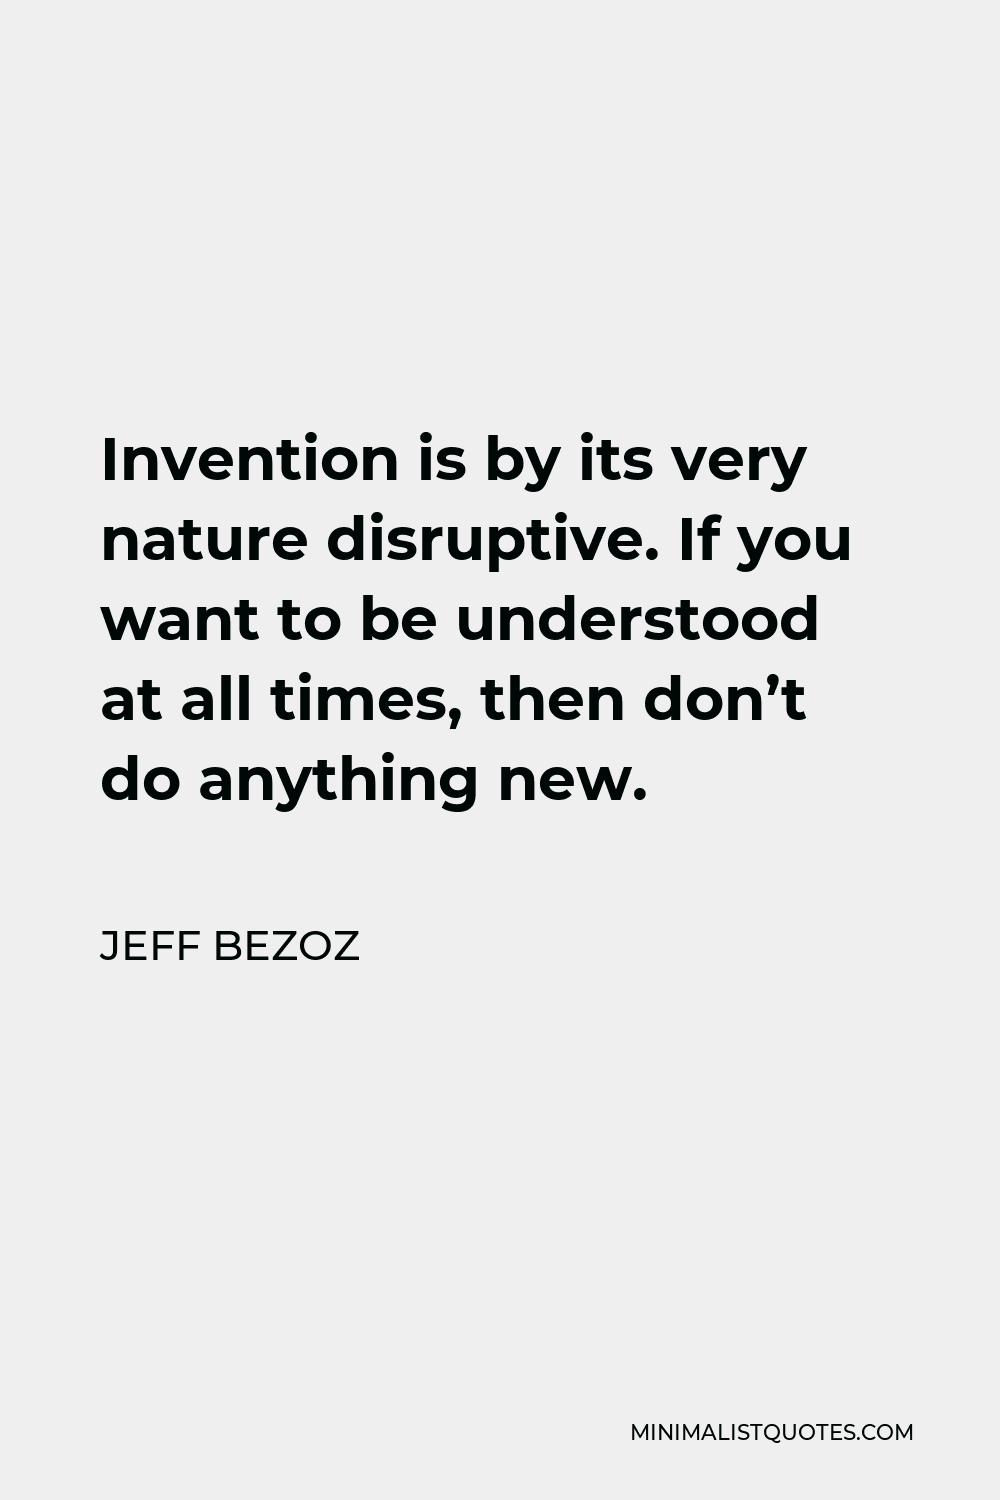 Jeff Bezoz Quote - Invention is by its very nature disruptive. If you want to be understood at all times, then don’t do anything new.